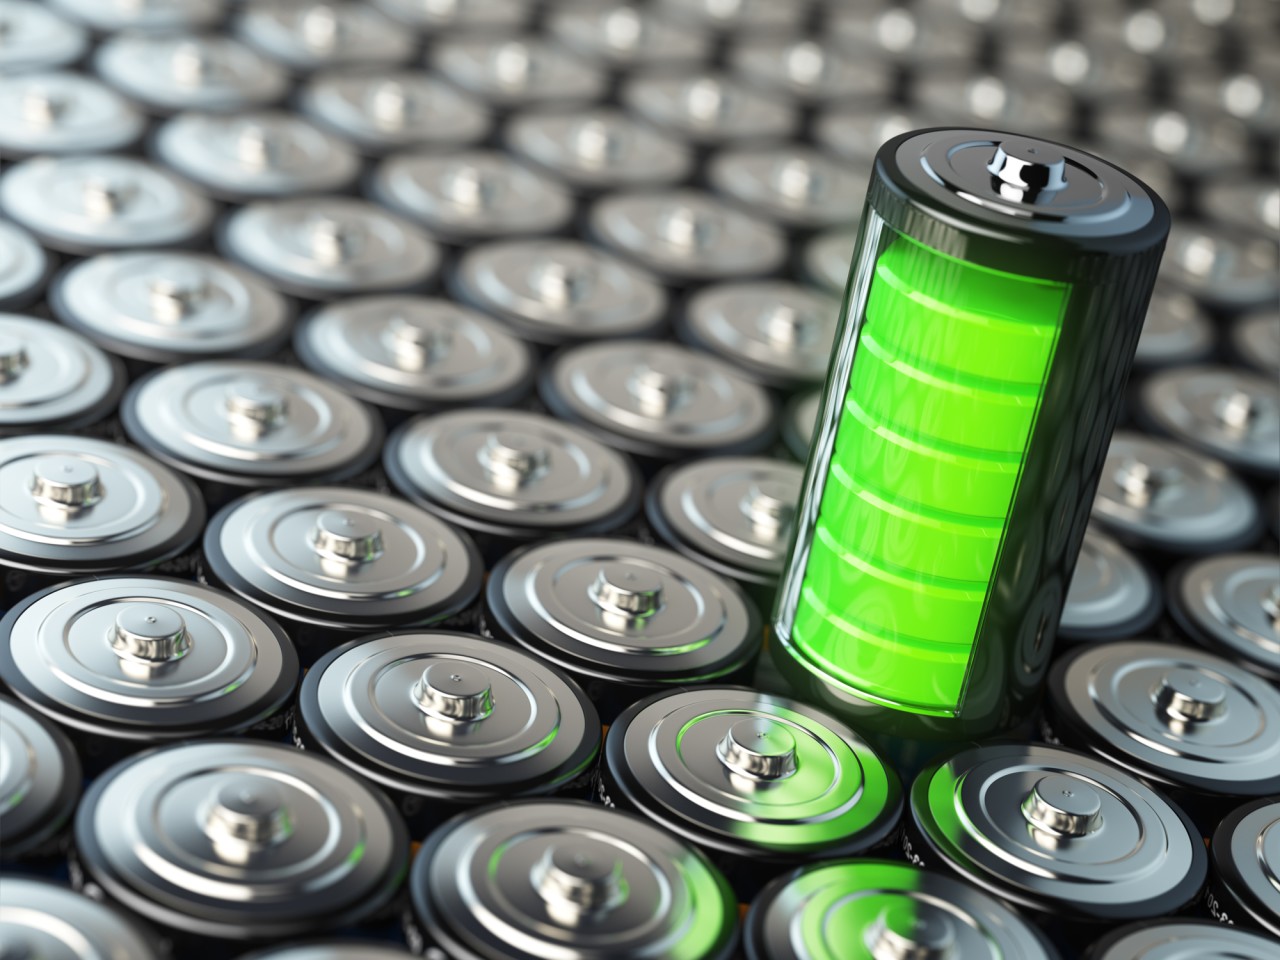 Scientists have made a breakthrough in the development of advanced lithium batteries that could enable them to charge faster and be less prone to failure